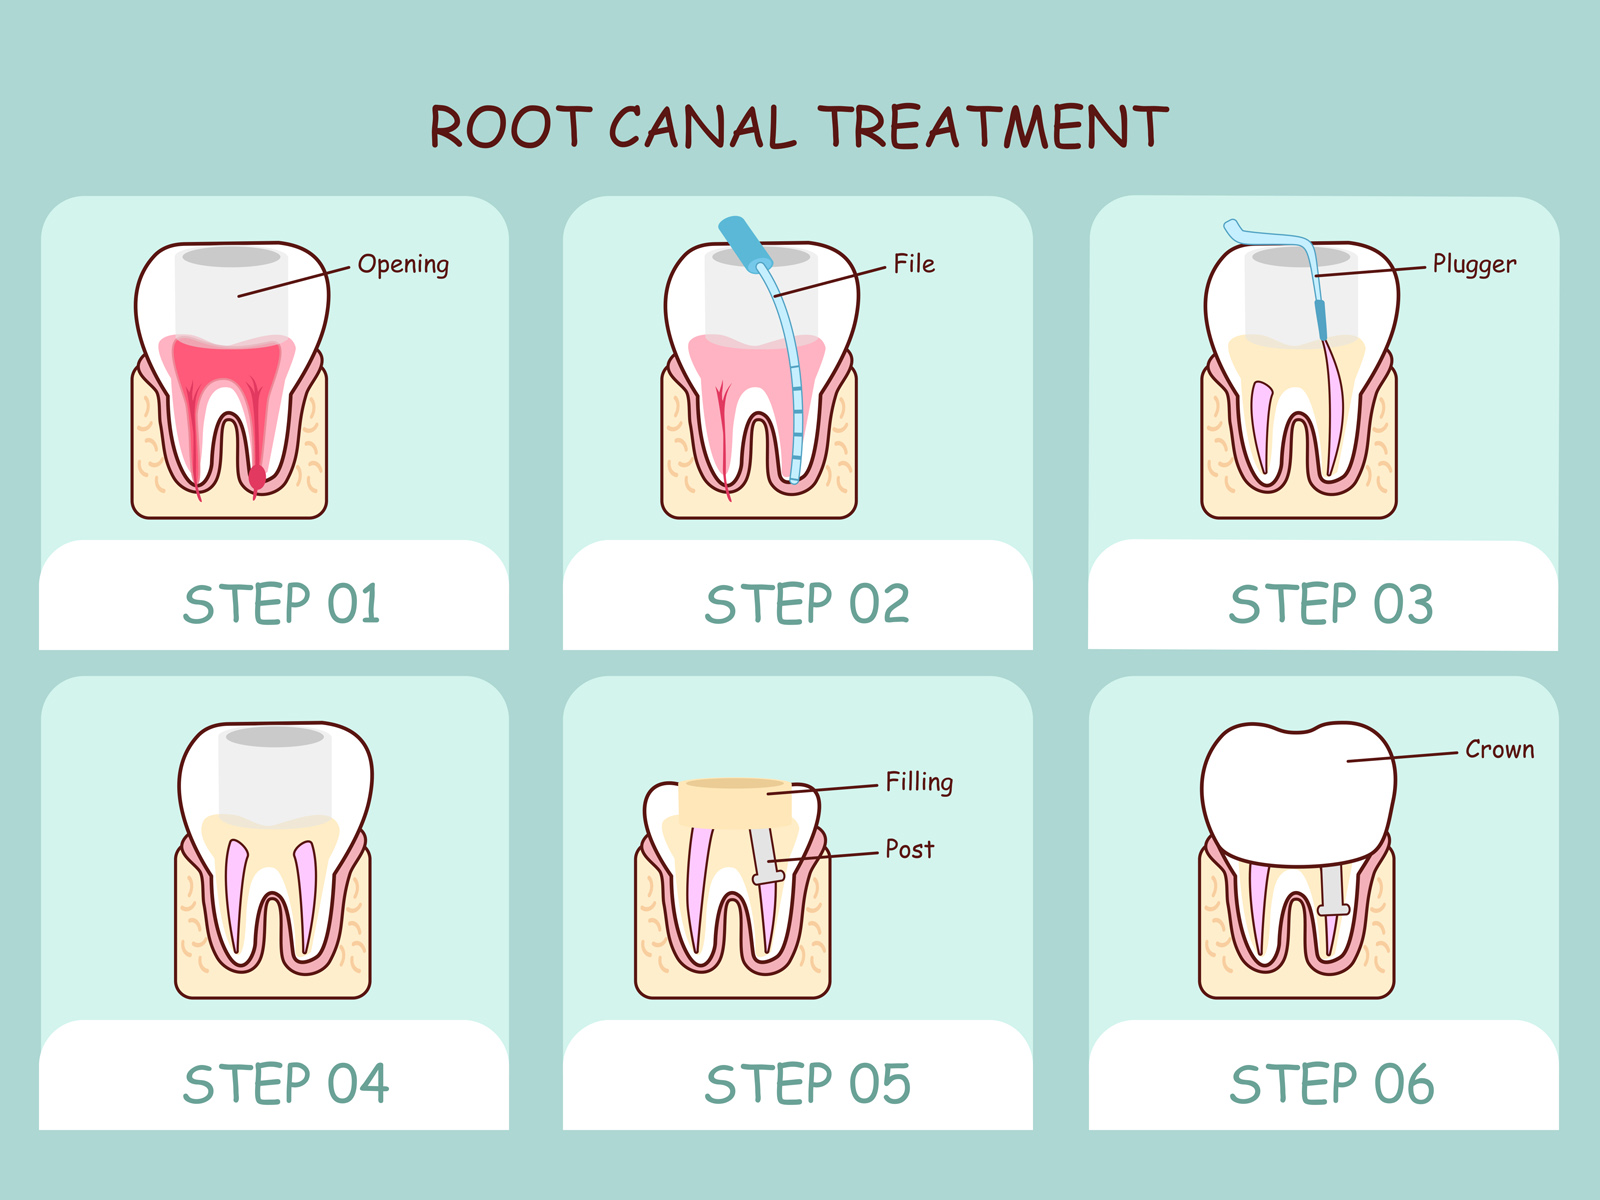 Does a Big Cavity Mean Root Canal?